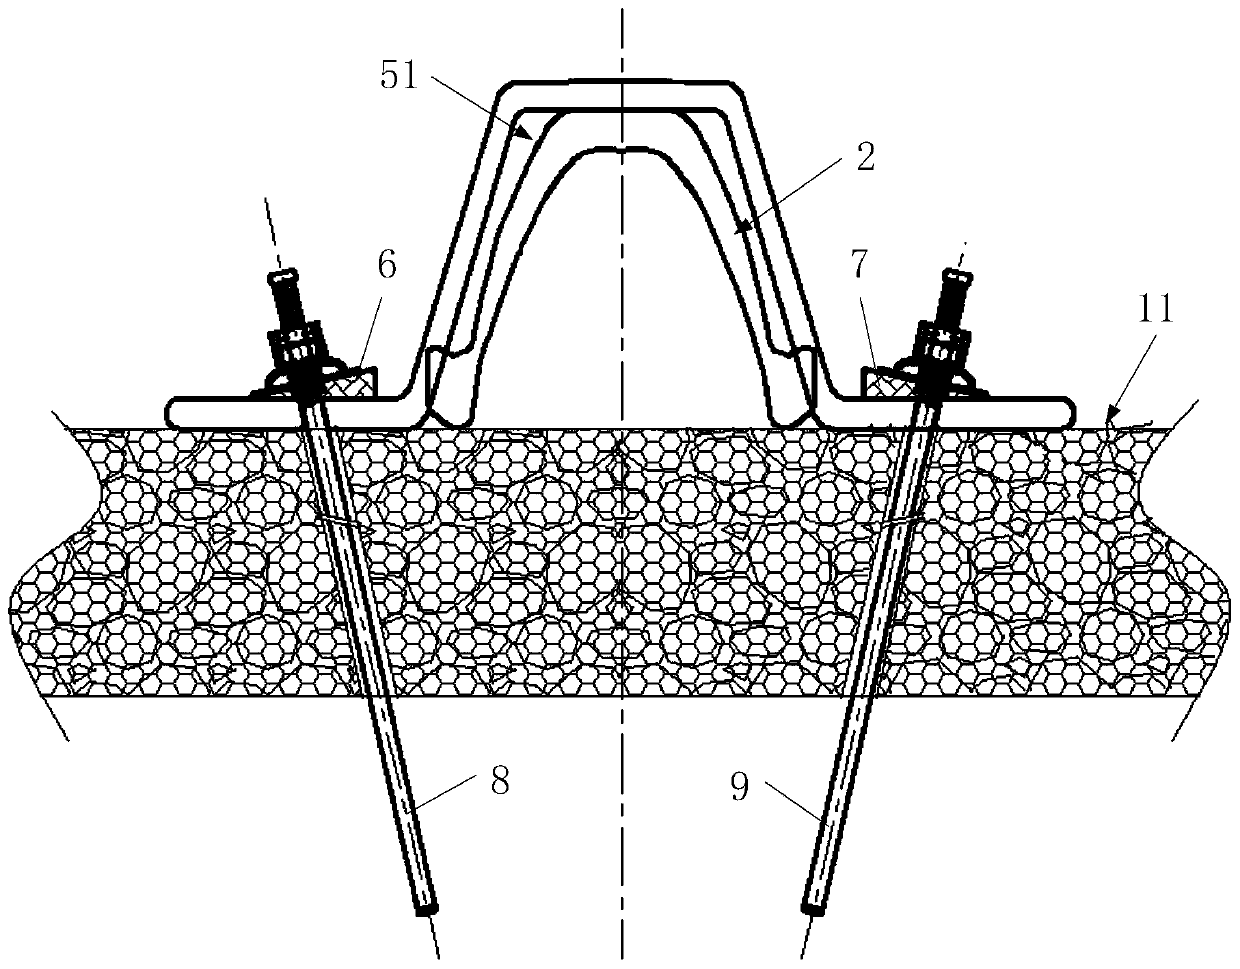 Surrounding rock supporting device